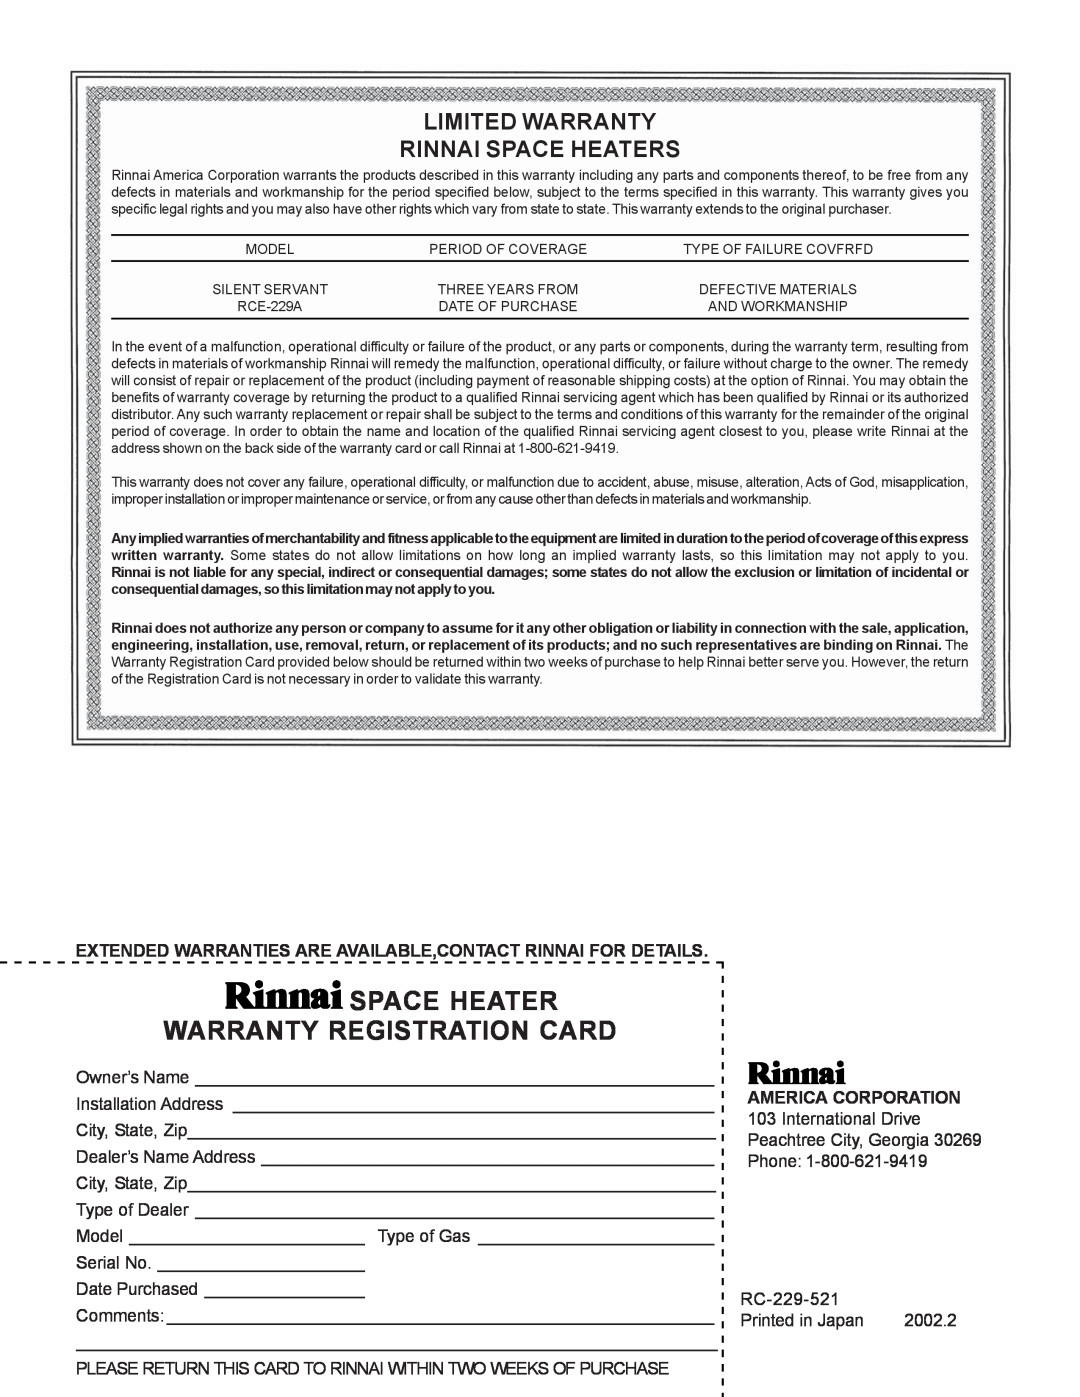 Rinnai RCE-229A installation instructions Space Heater Warranty Registration Card, Limited Warranty Rinnai Space Heaters 